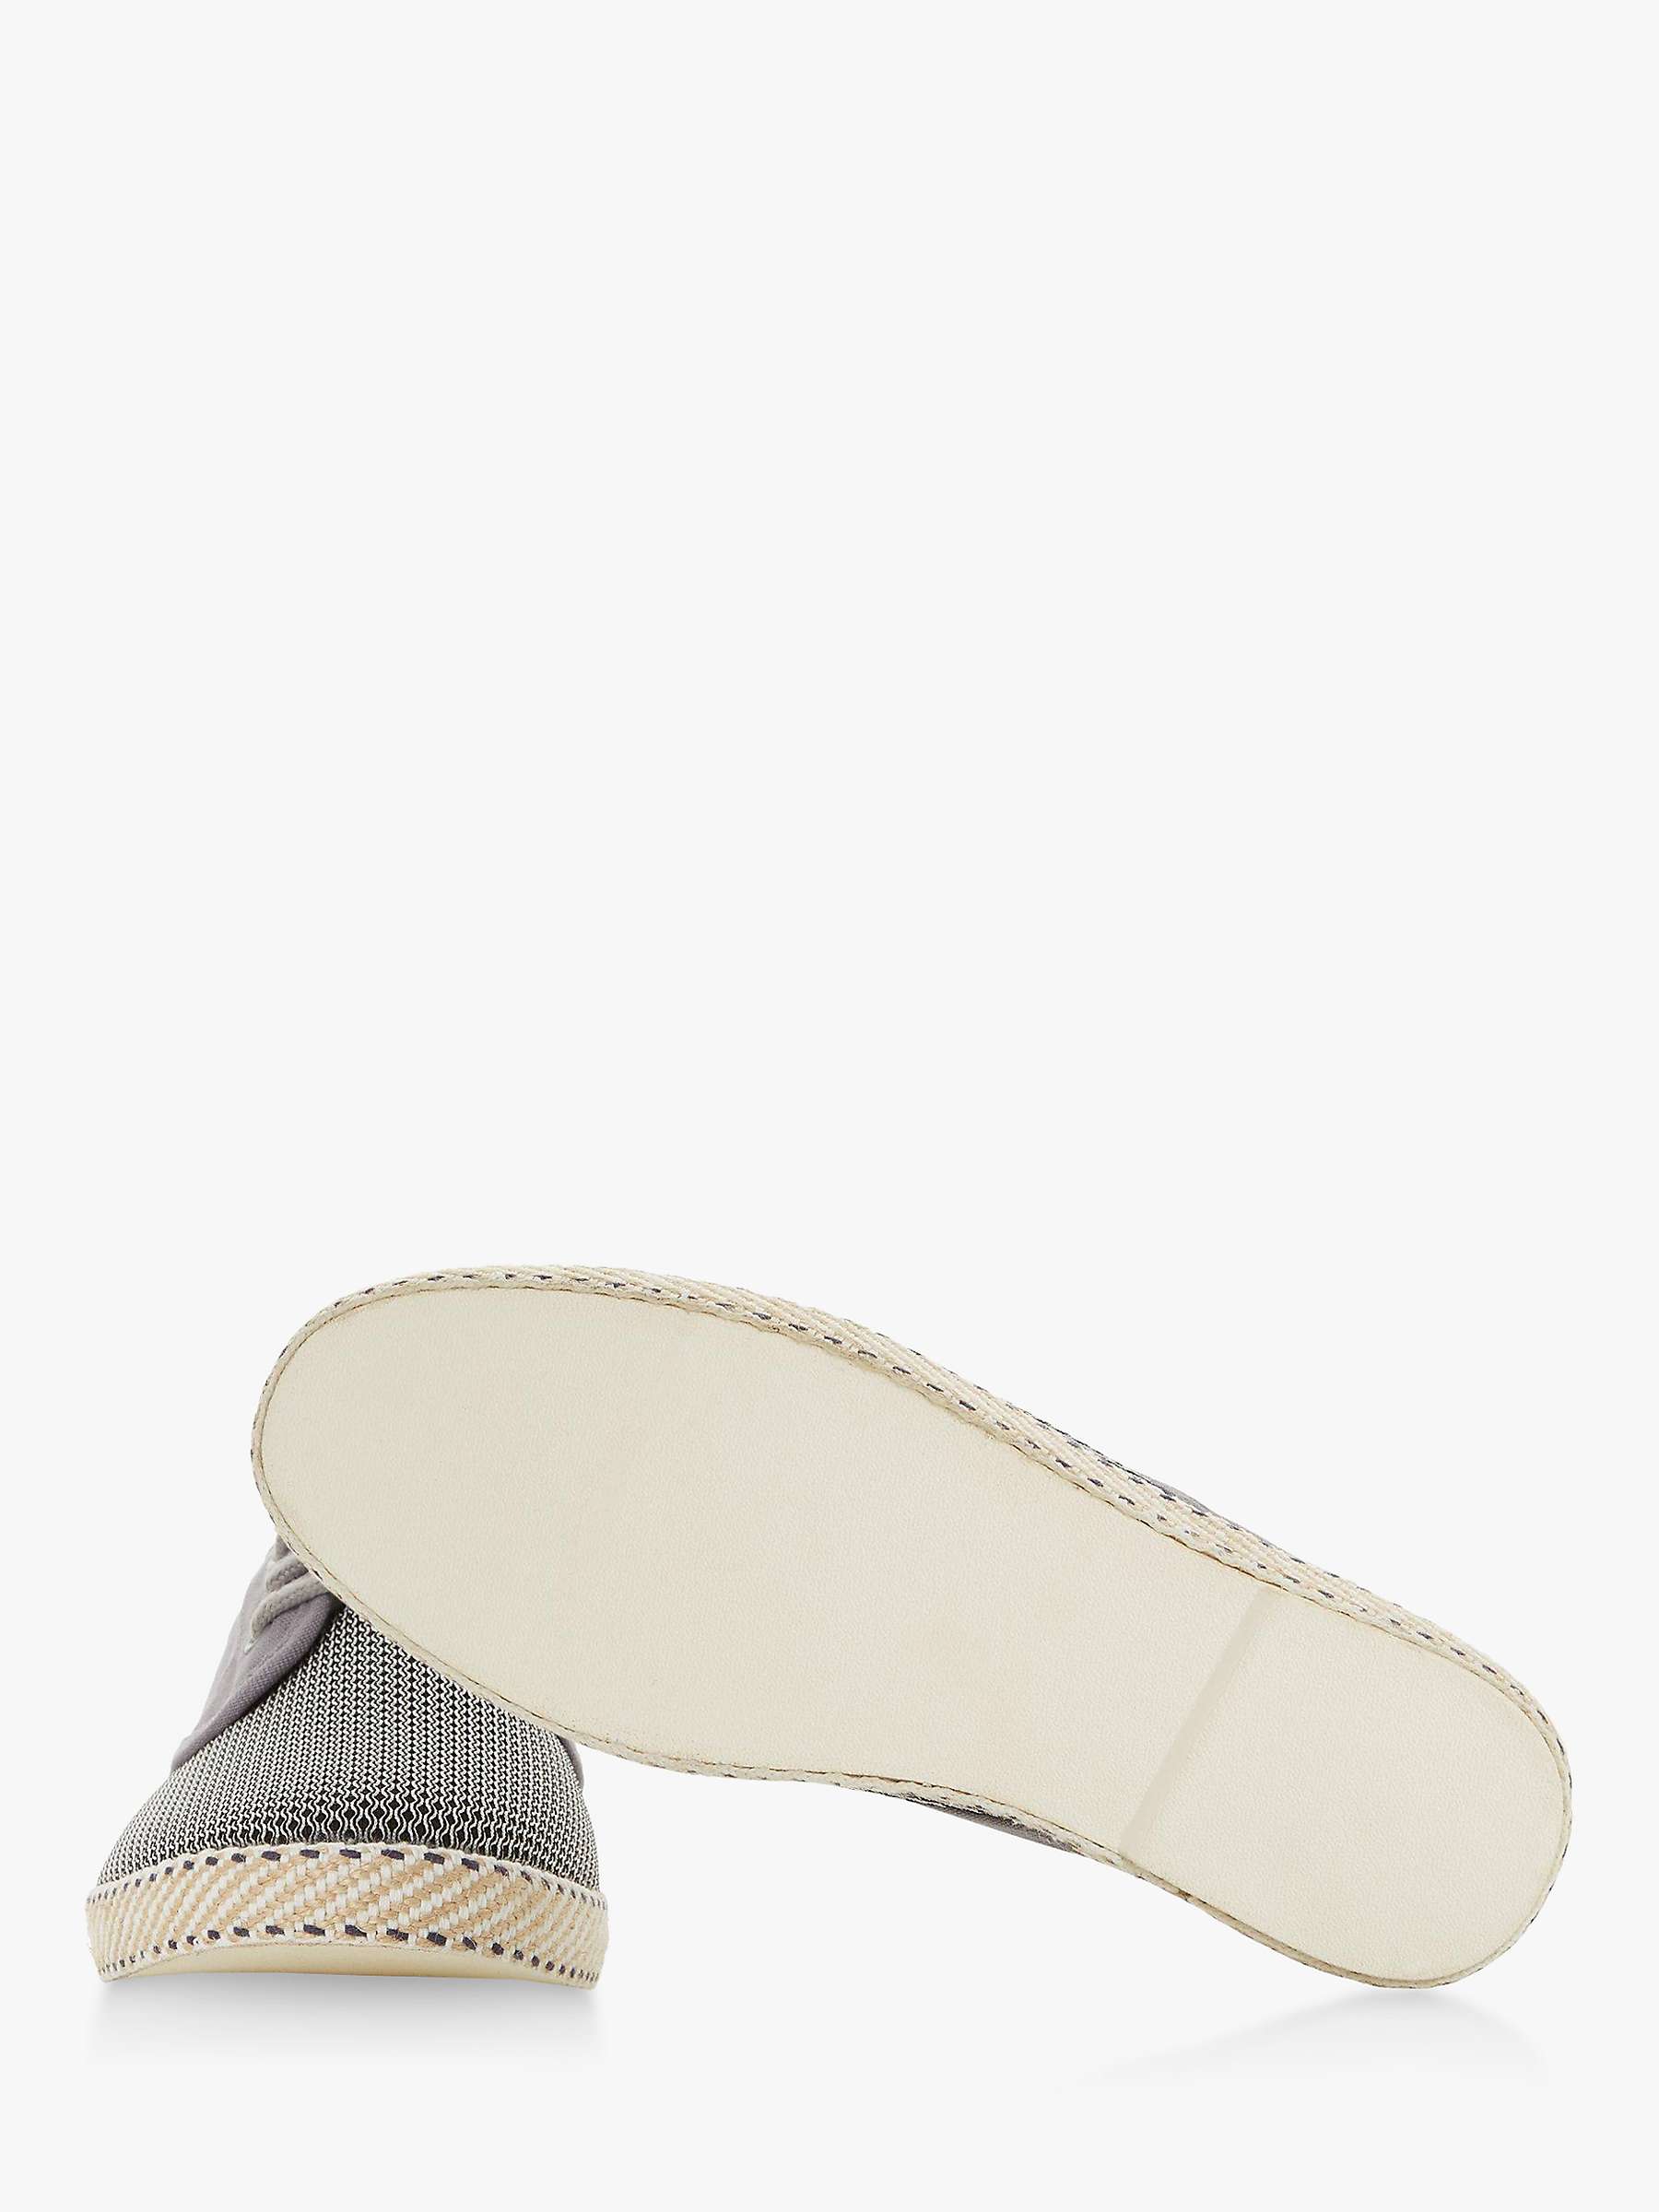 Buy Dune Flash Canvas Casual Shoes Online at johnlewis.com